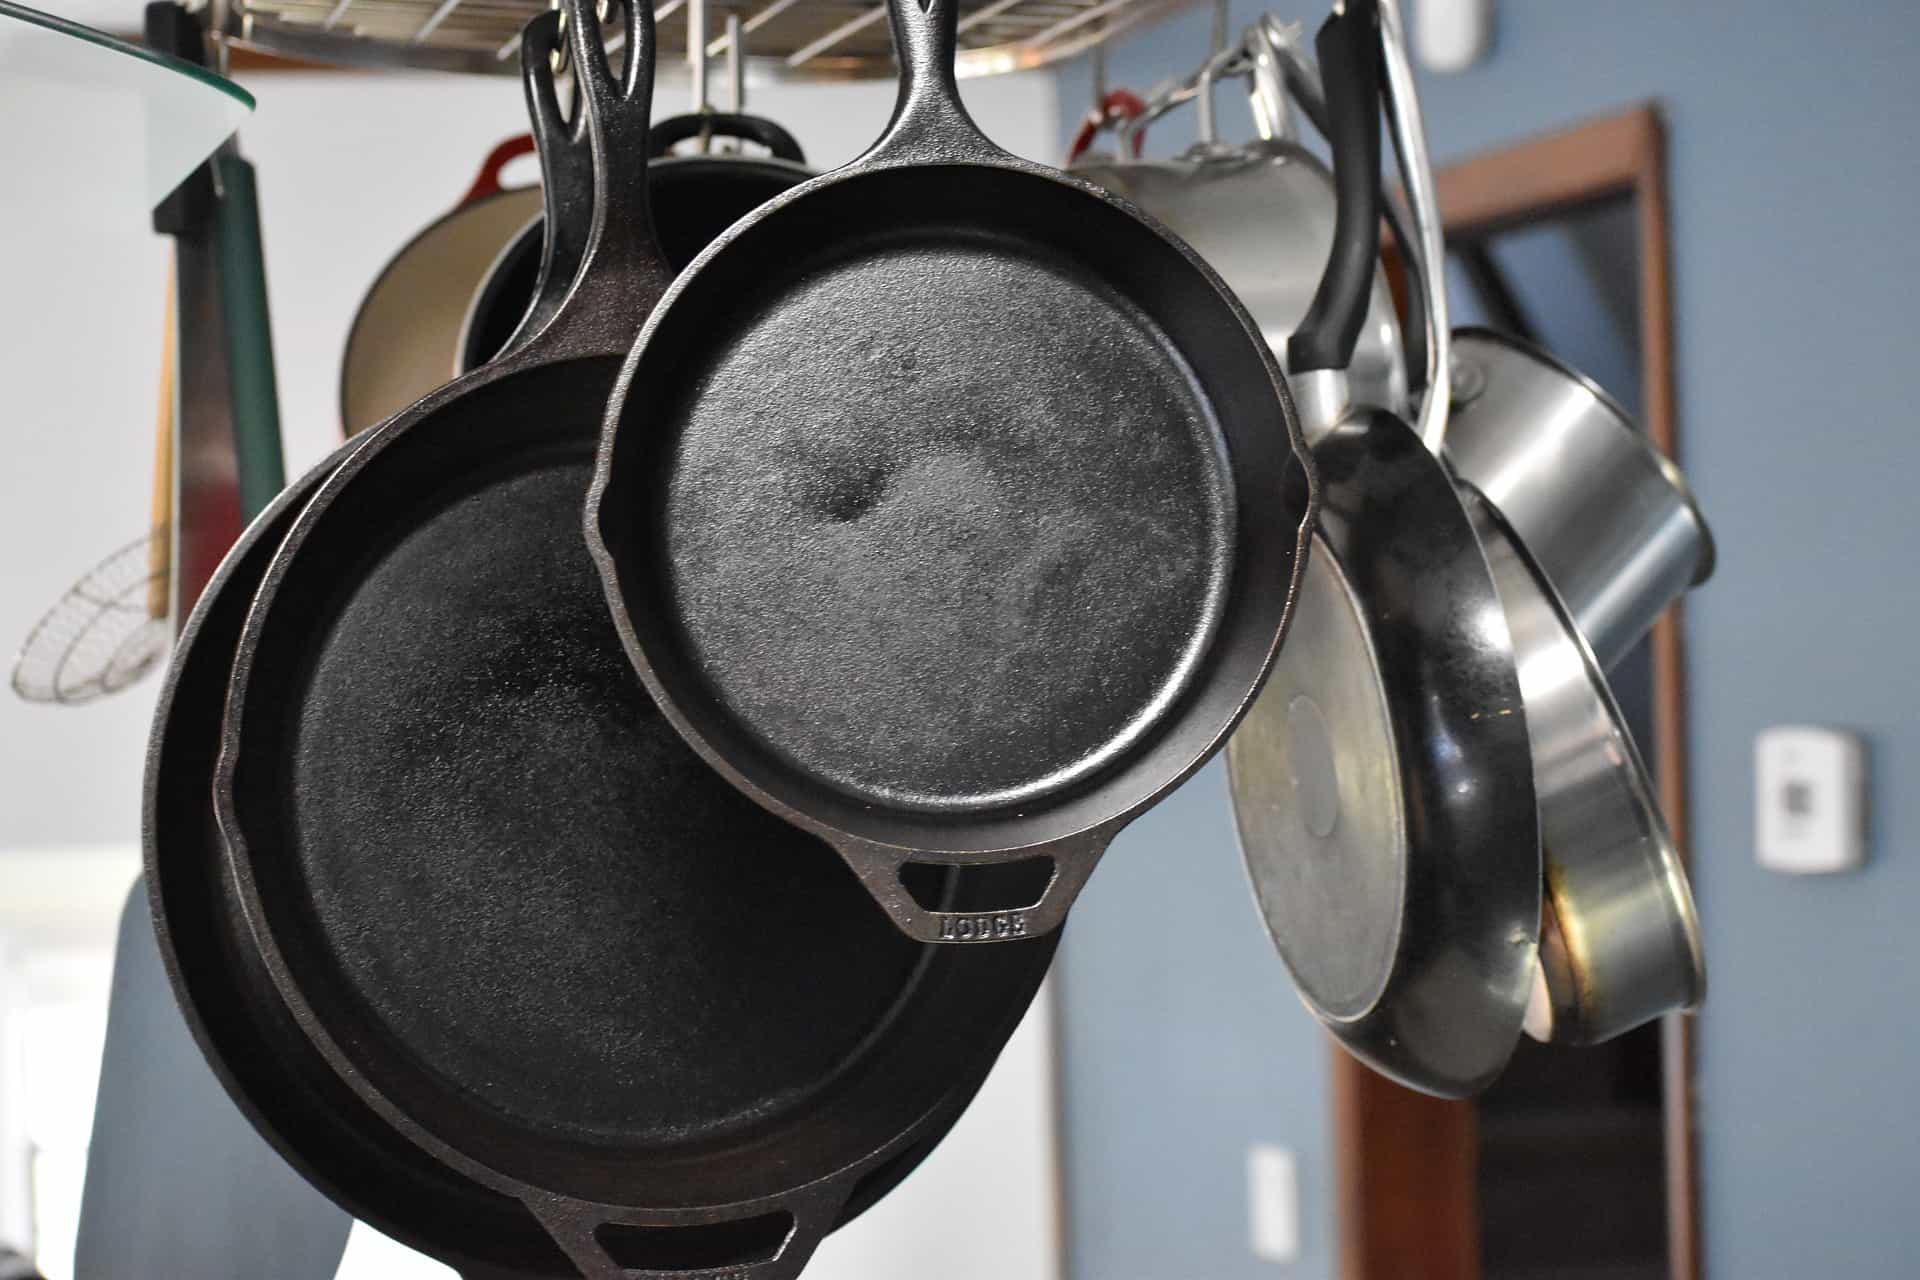 Hanging stainless steel and cast iron pans.